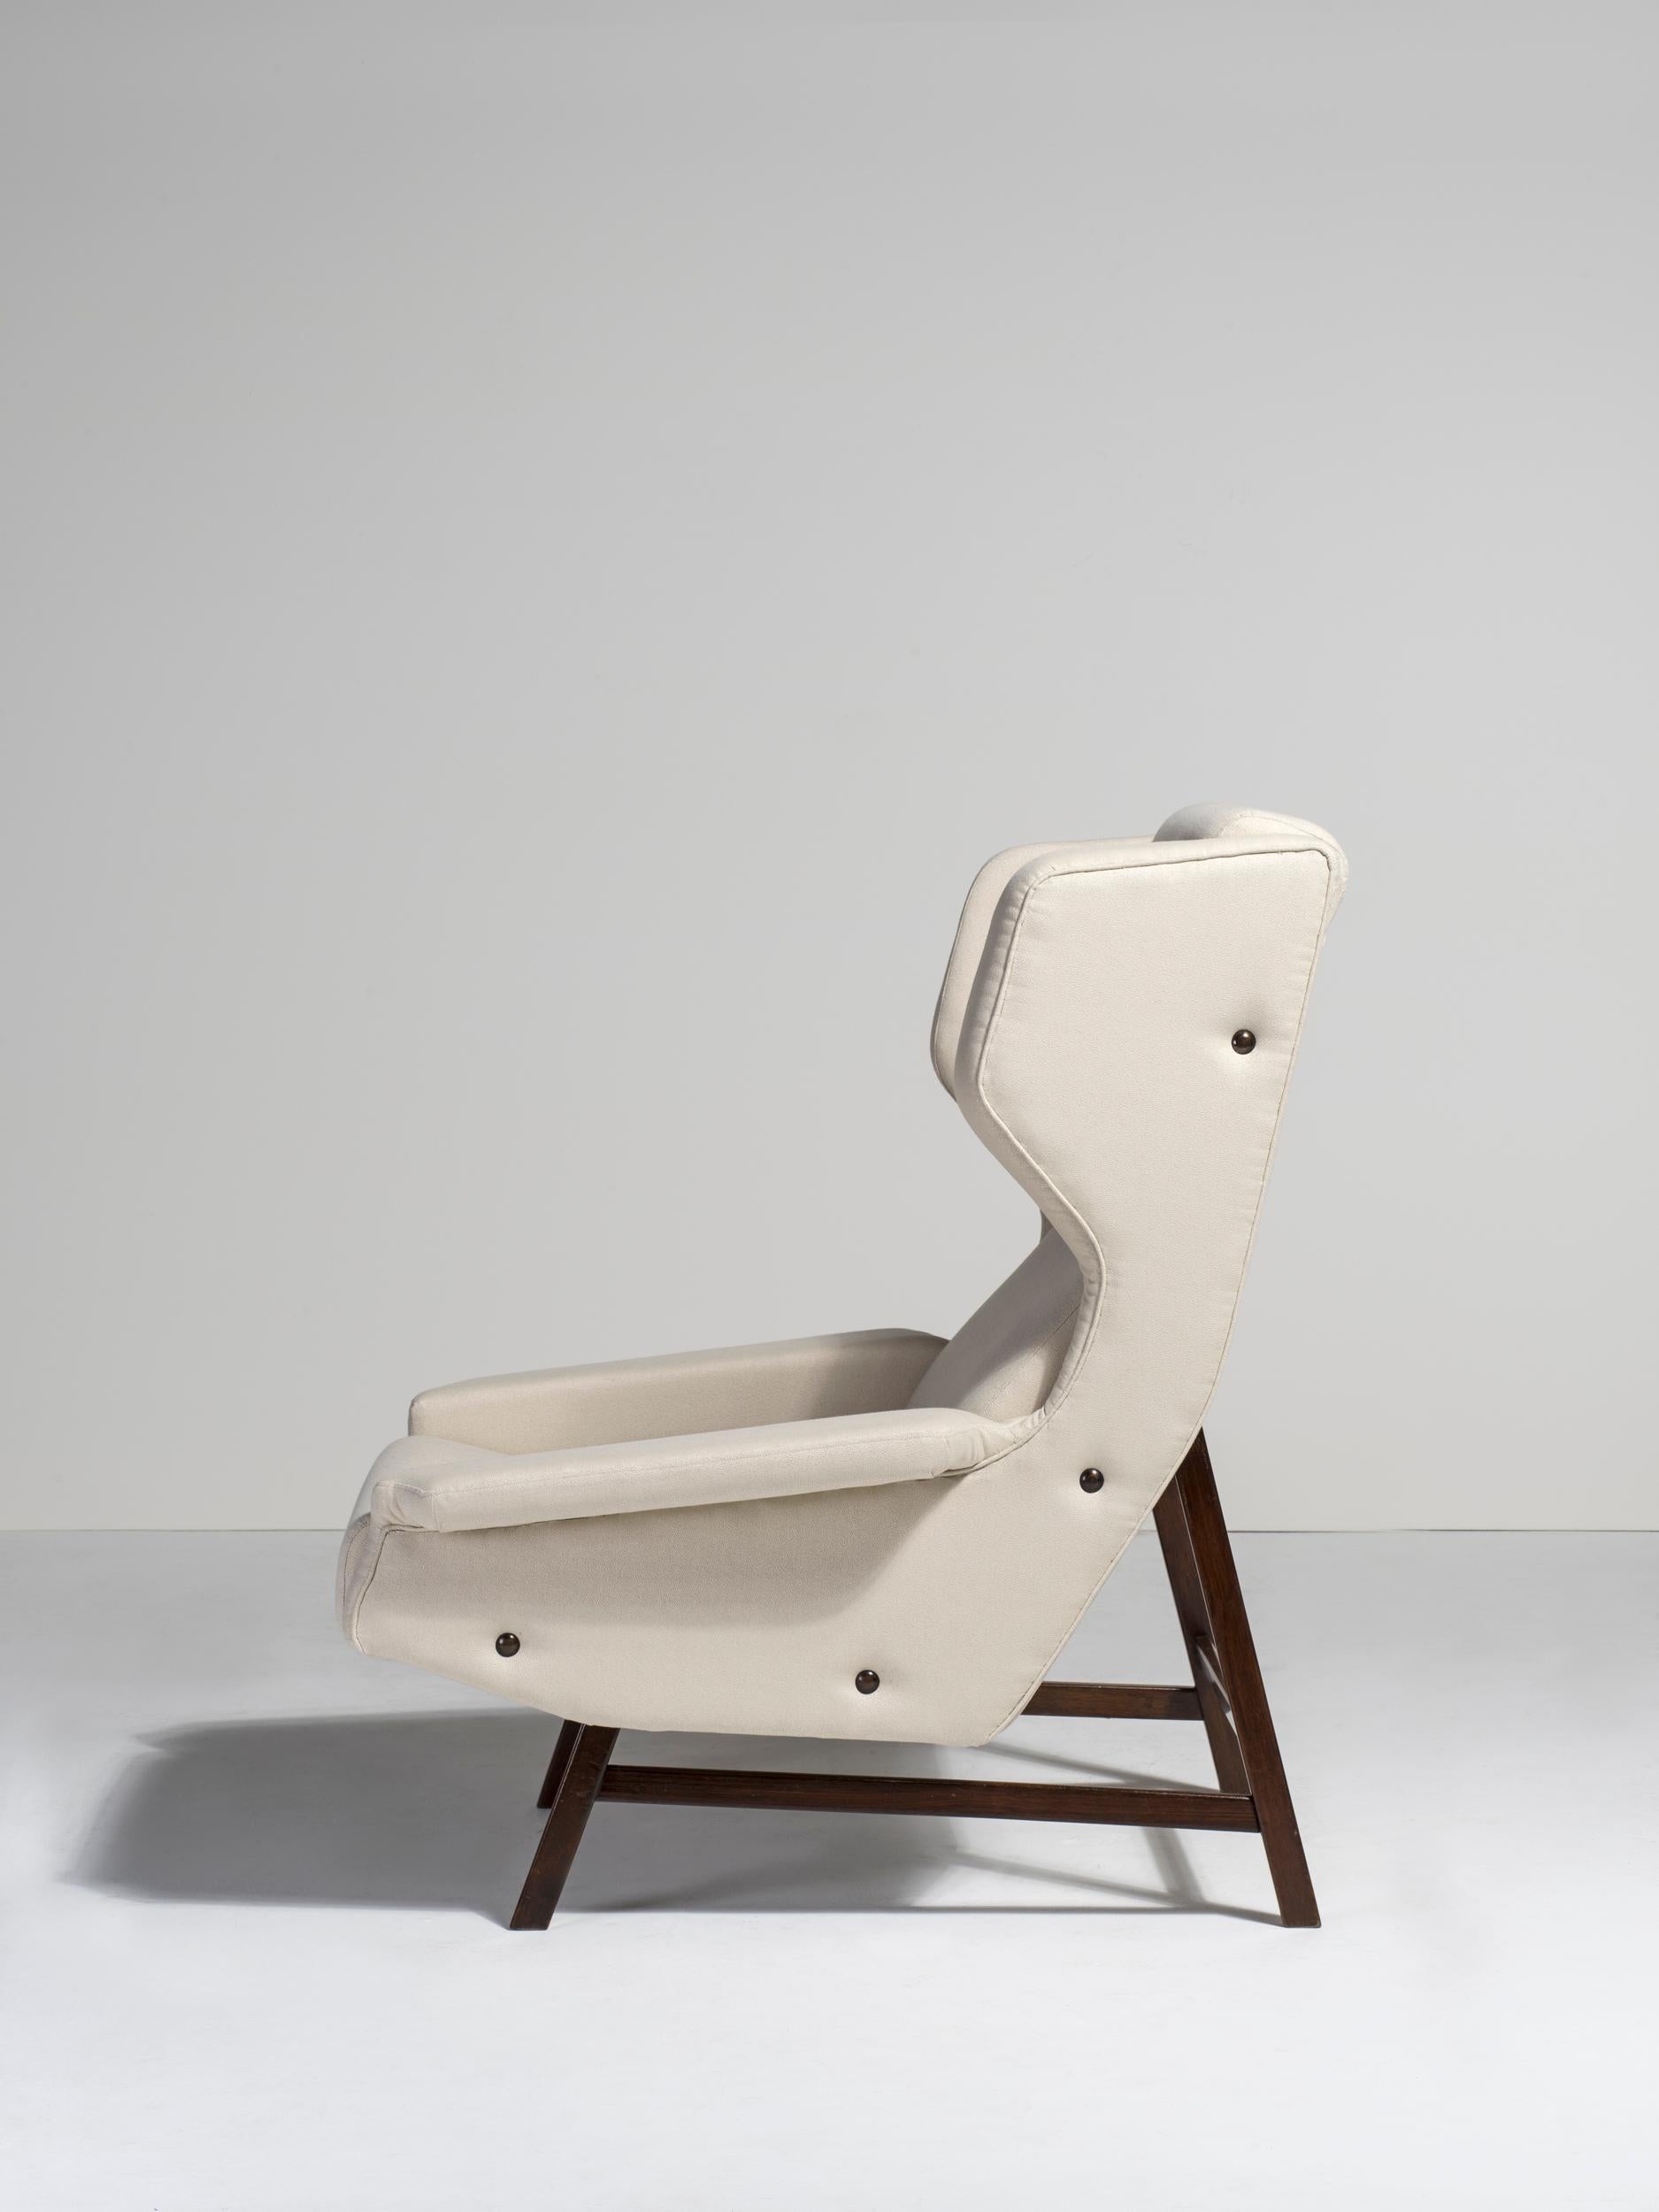 Rare Gianfranco Frattini model 877 lounge chair for Cassina. The 877 is Frattini’s modern interpretation of the classic wing-back armchair and is one of the historic examples of Italian-made design. The designer uses clear, pronounced geometric